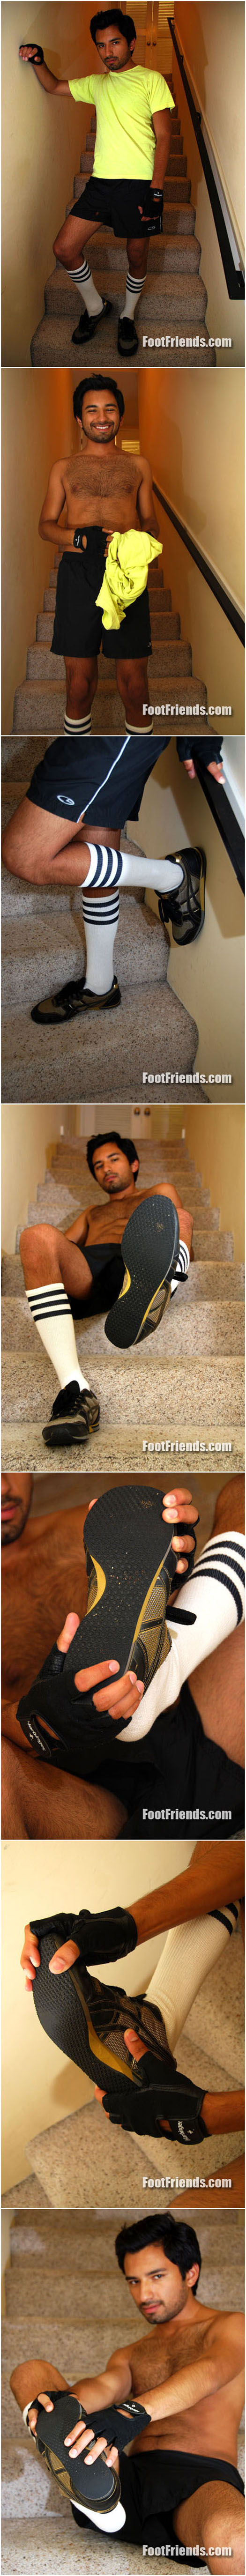 Hot Latino with hairy body and feet in athletic shoes